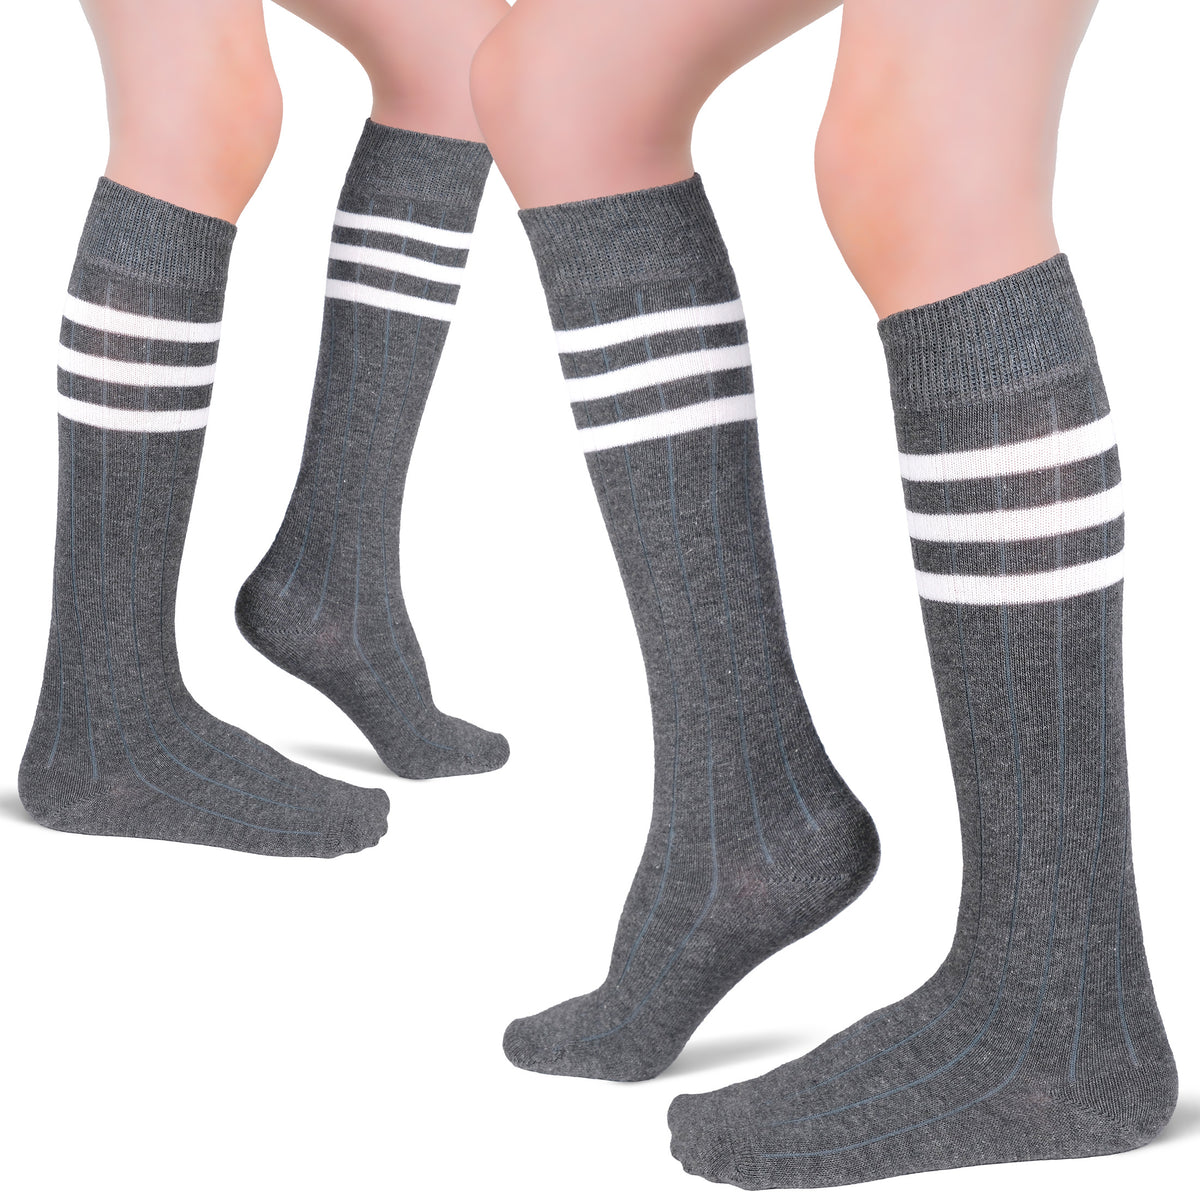 The picture shows two females donning gray socks with white stripes, specifically Cotton Kids' Knee-High Socks.